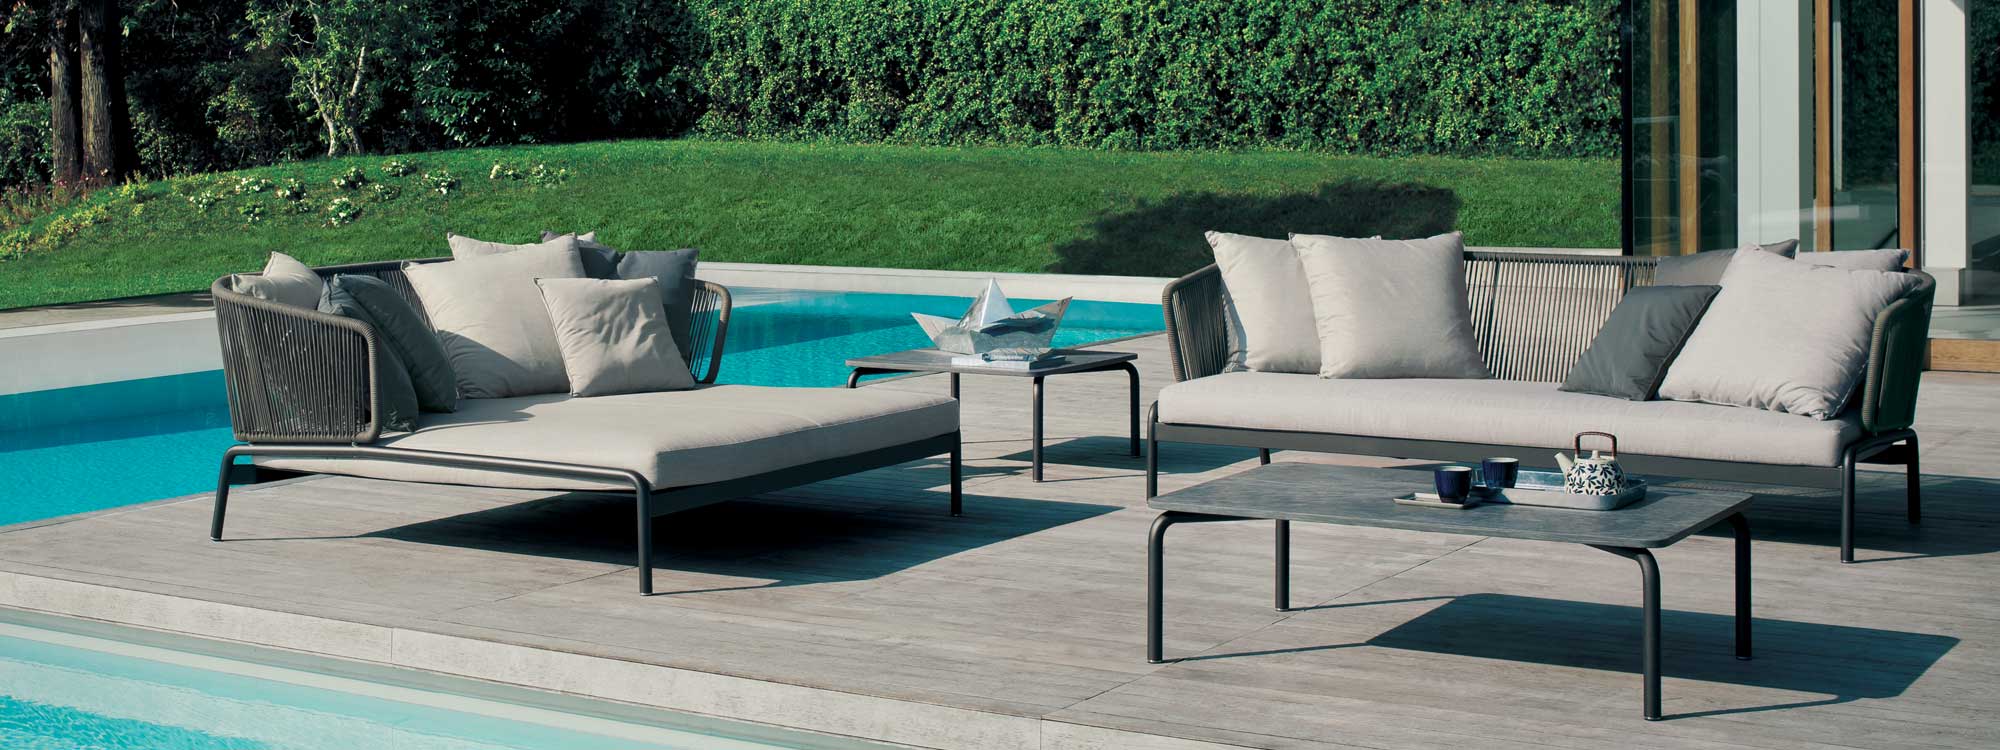 Image of RODA Spool 3 seat garden sofa and twin daybed with grey frames and grey cushions, shown on poolside terrace